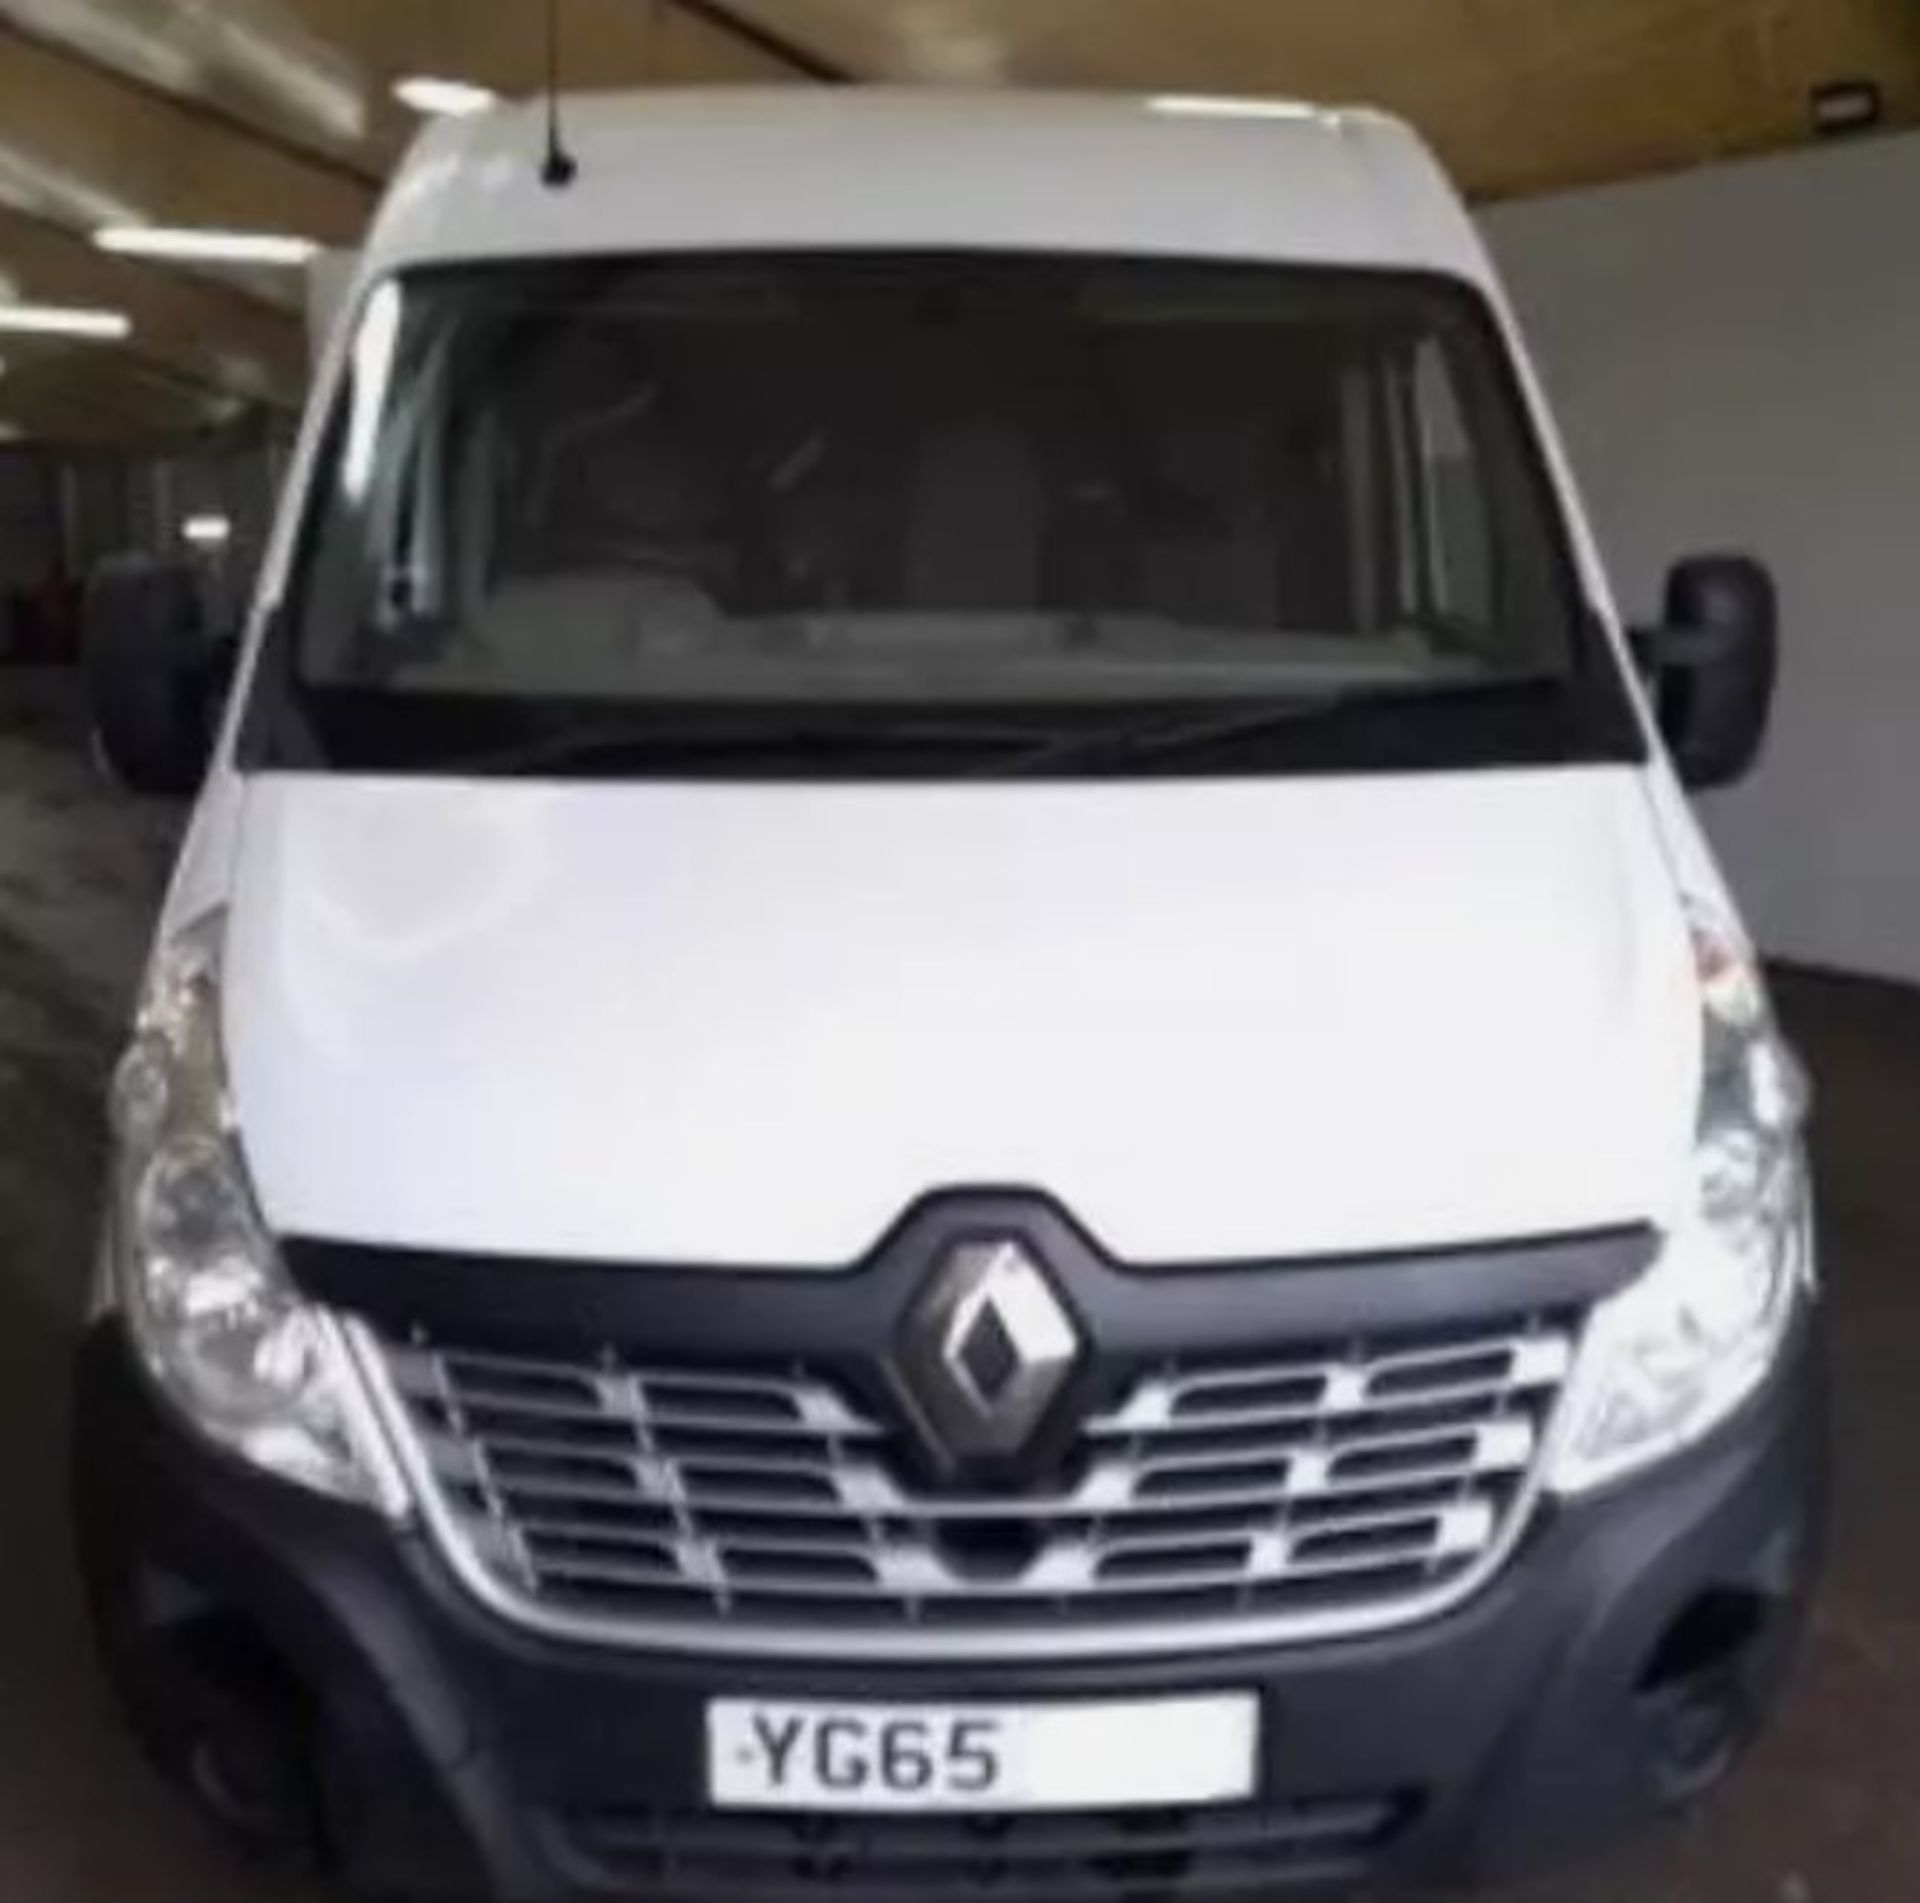 2015 RENAULT MASTER LM35 DCI 135 - Image 4 of 11